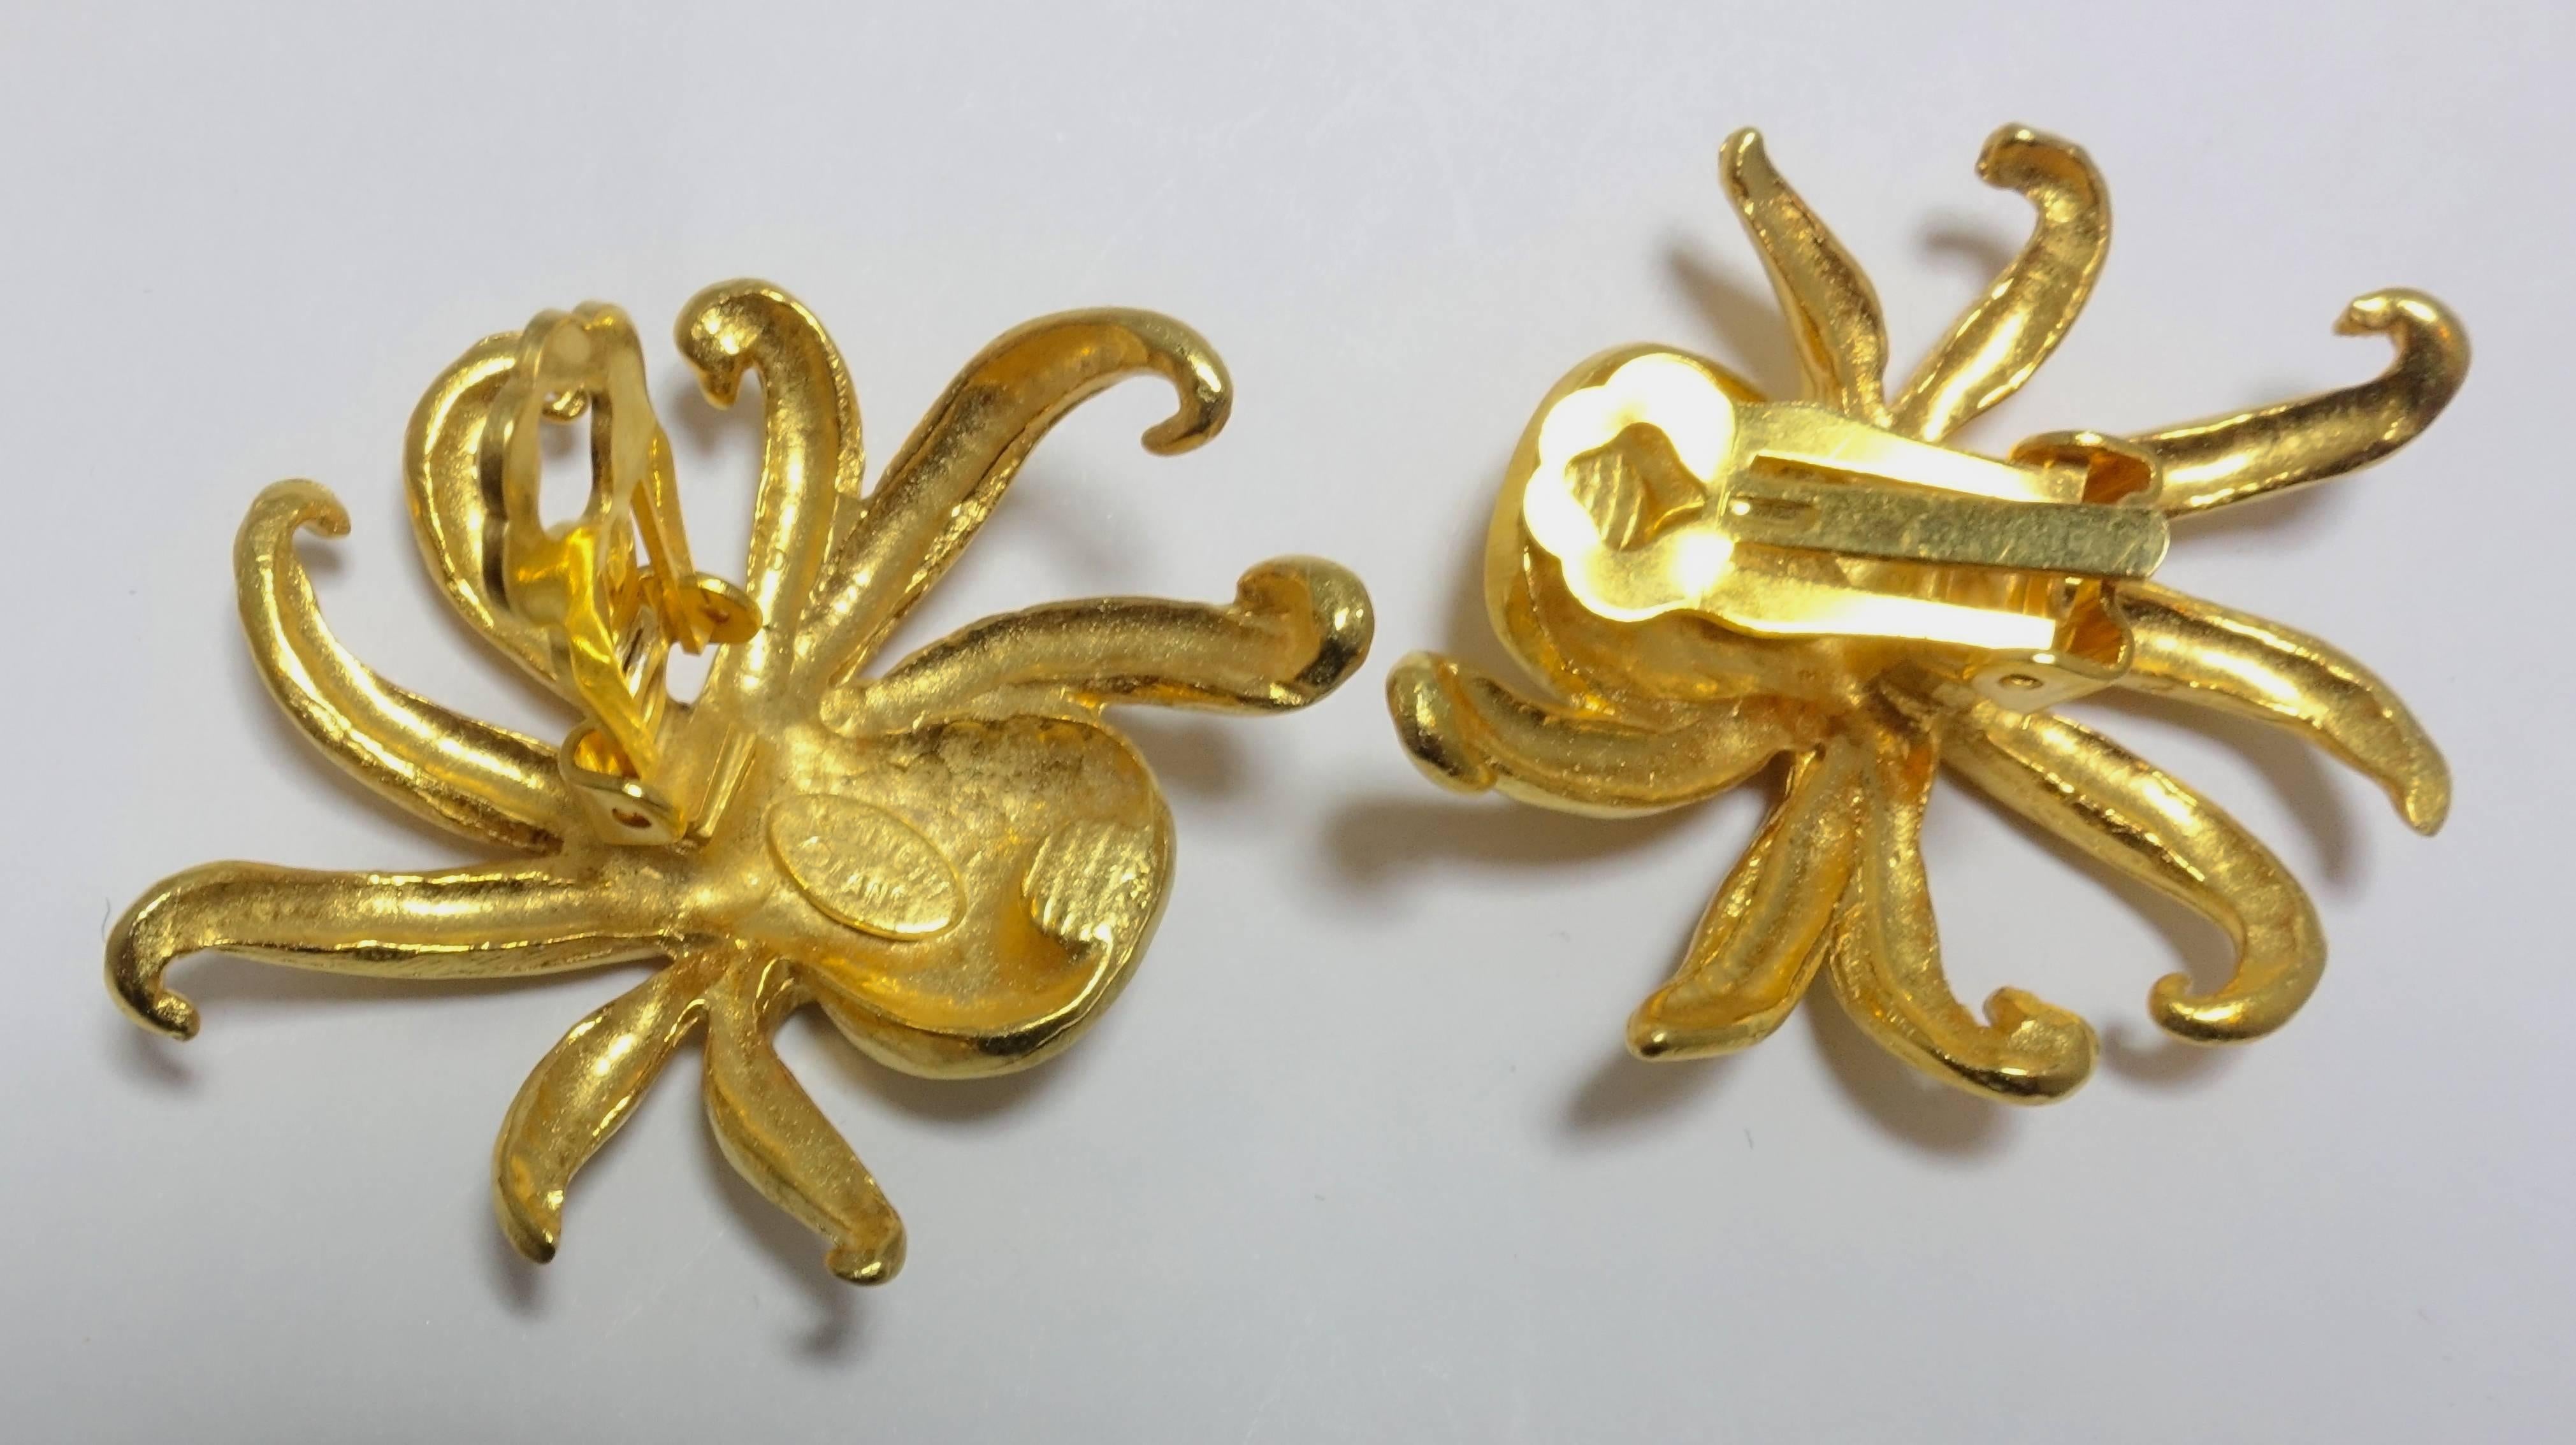 These Kenneth Jay Lane earrings feature an octopus design in a gold tone setting.  These clip earrings measure 1-1/2” x 1-1/2” and are signed “Kenneth Lane”.  They are in excellent condition!